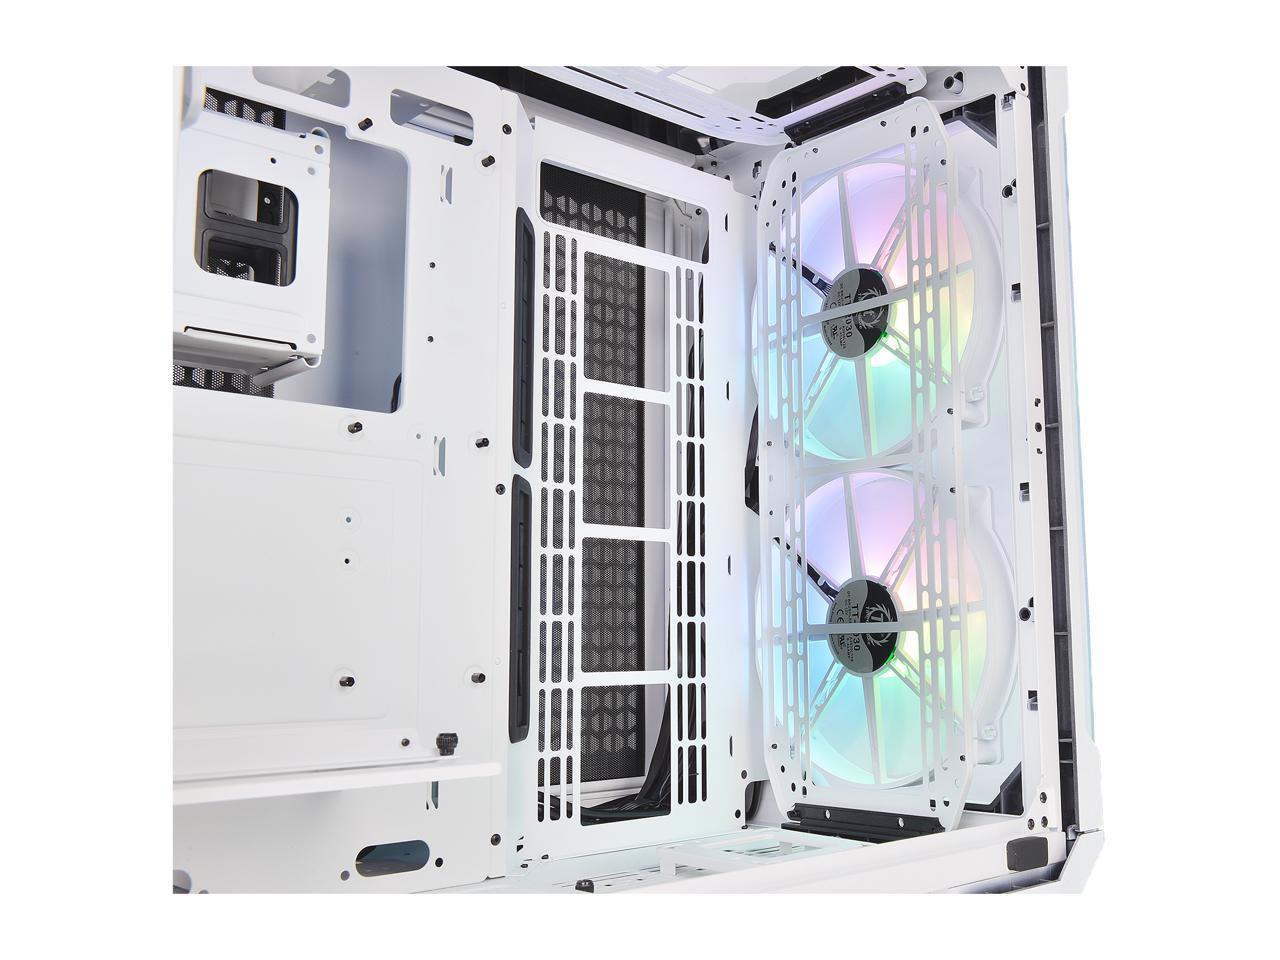 Thermaltake View 51 Snow Motherboard Sync ARGB E-ATX Full Tower Gaming Computer Case with 2 200mm ARGB 5V Motherboard Sync RGB Fans + 140mm Black Rear Fan Pre-Installed CA-1Q6-00M6WN-00